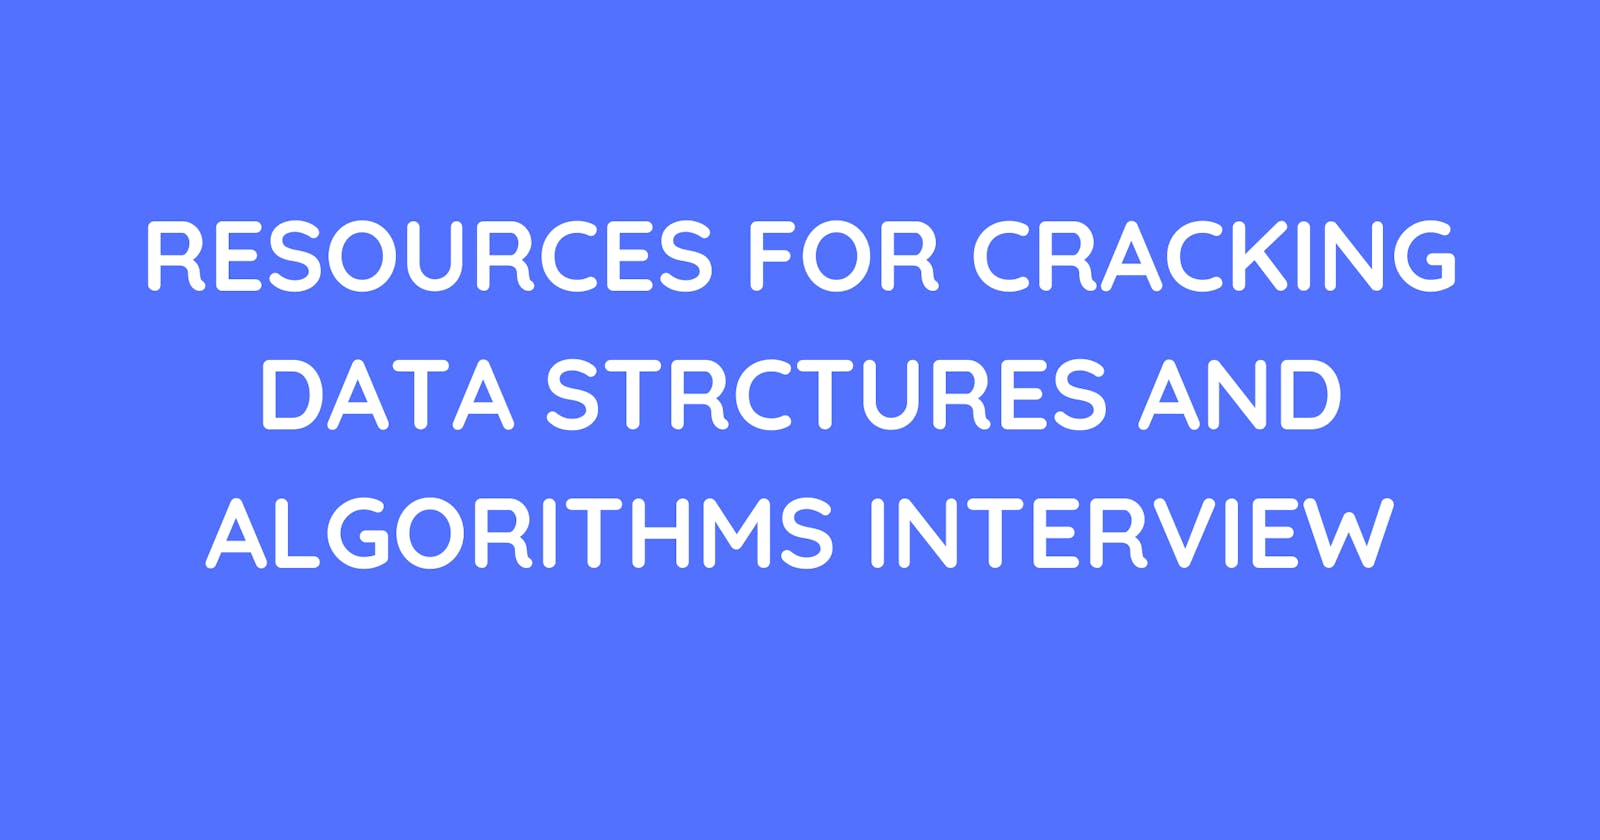 Resources for cracking data structures and algorithms interview